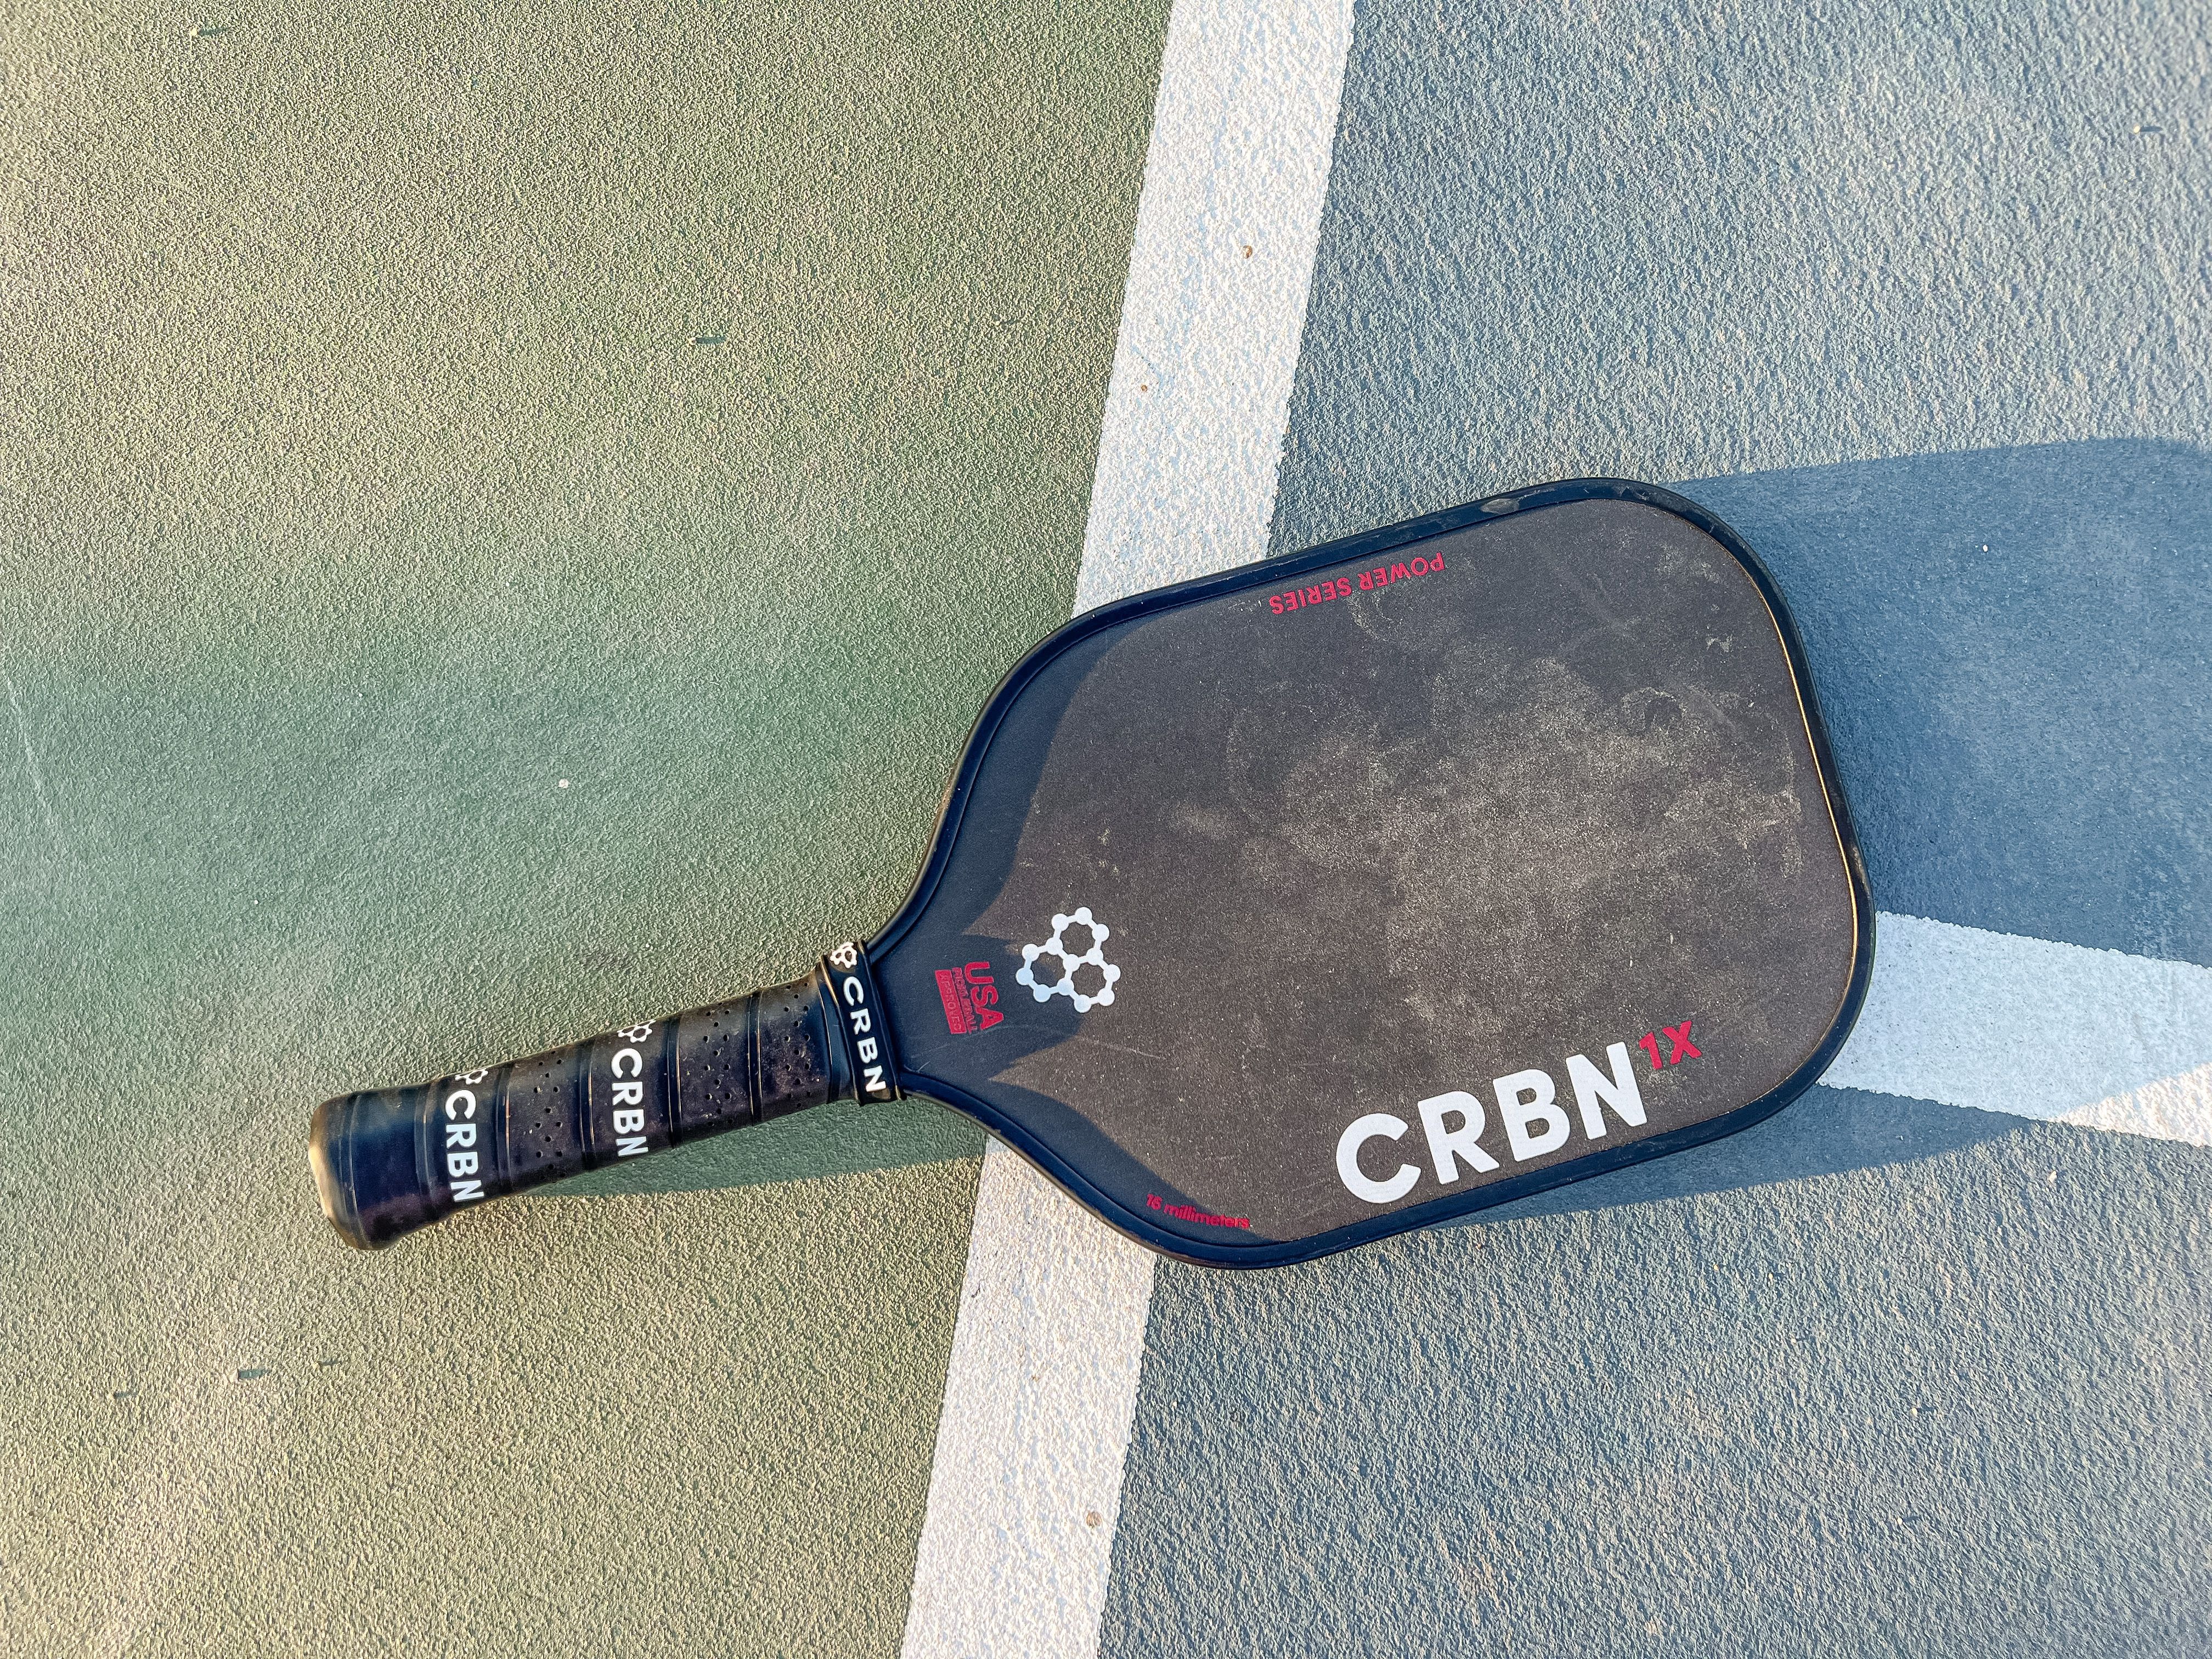 Photo of the CRBN-1X Power Series pickleball paddle placed on a court